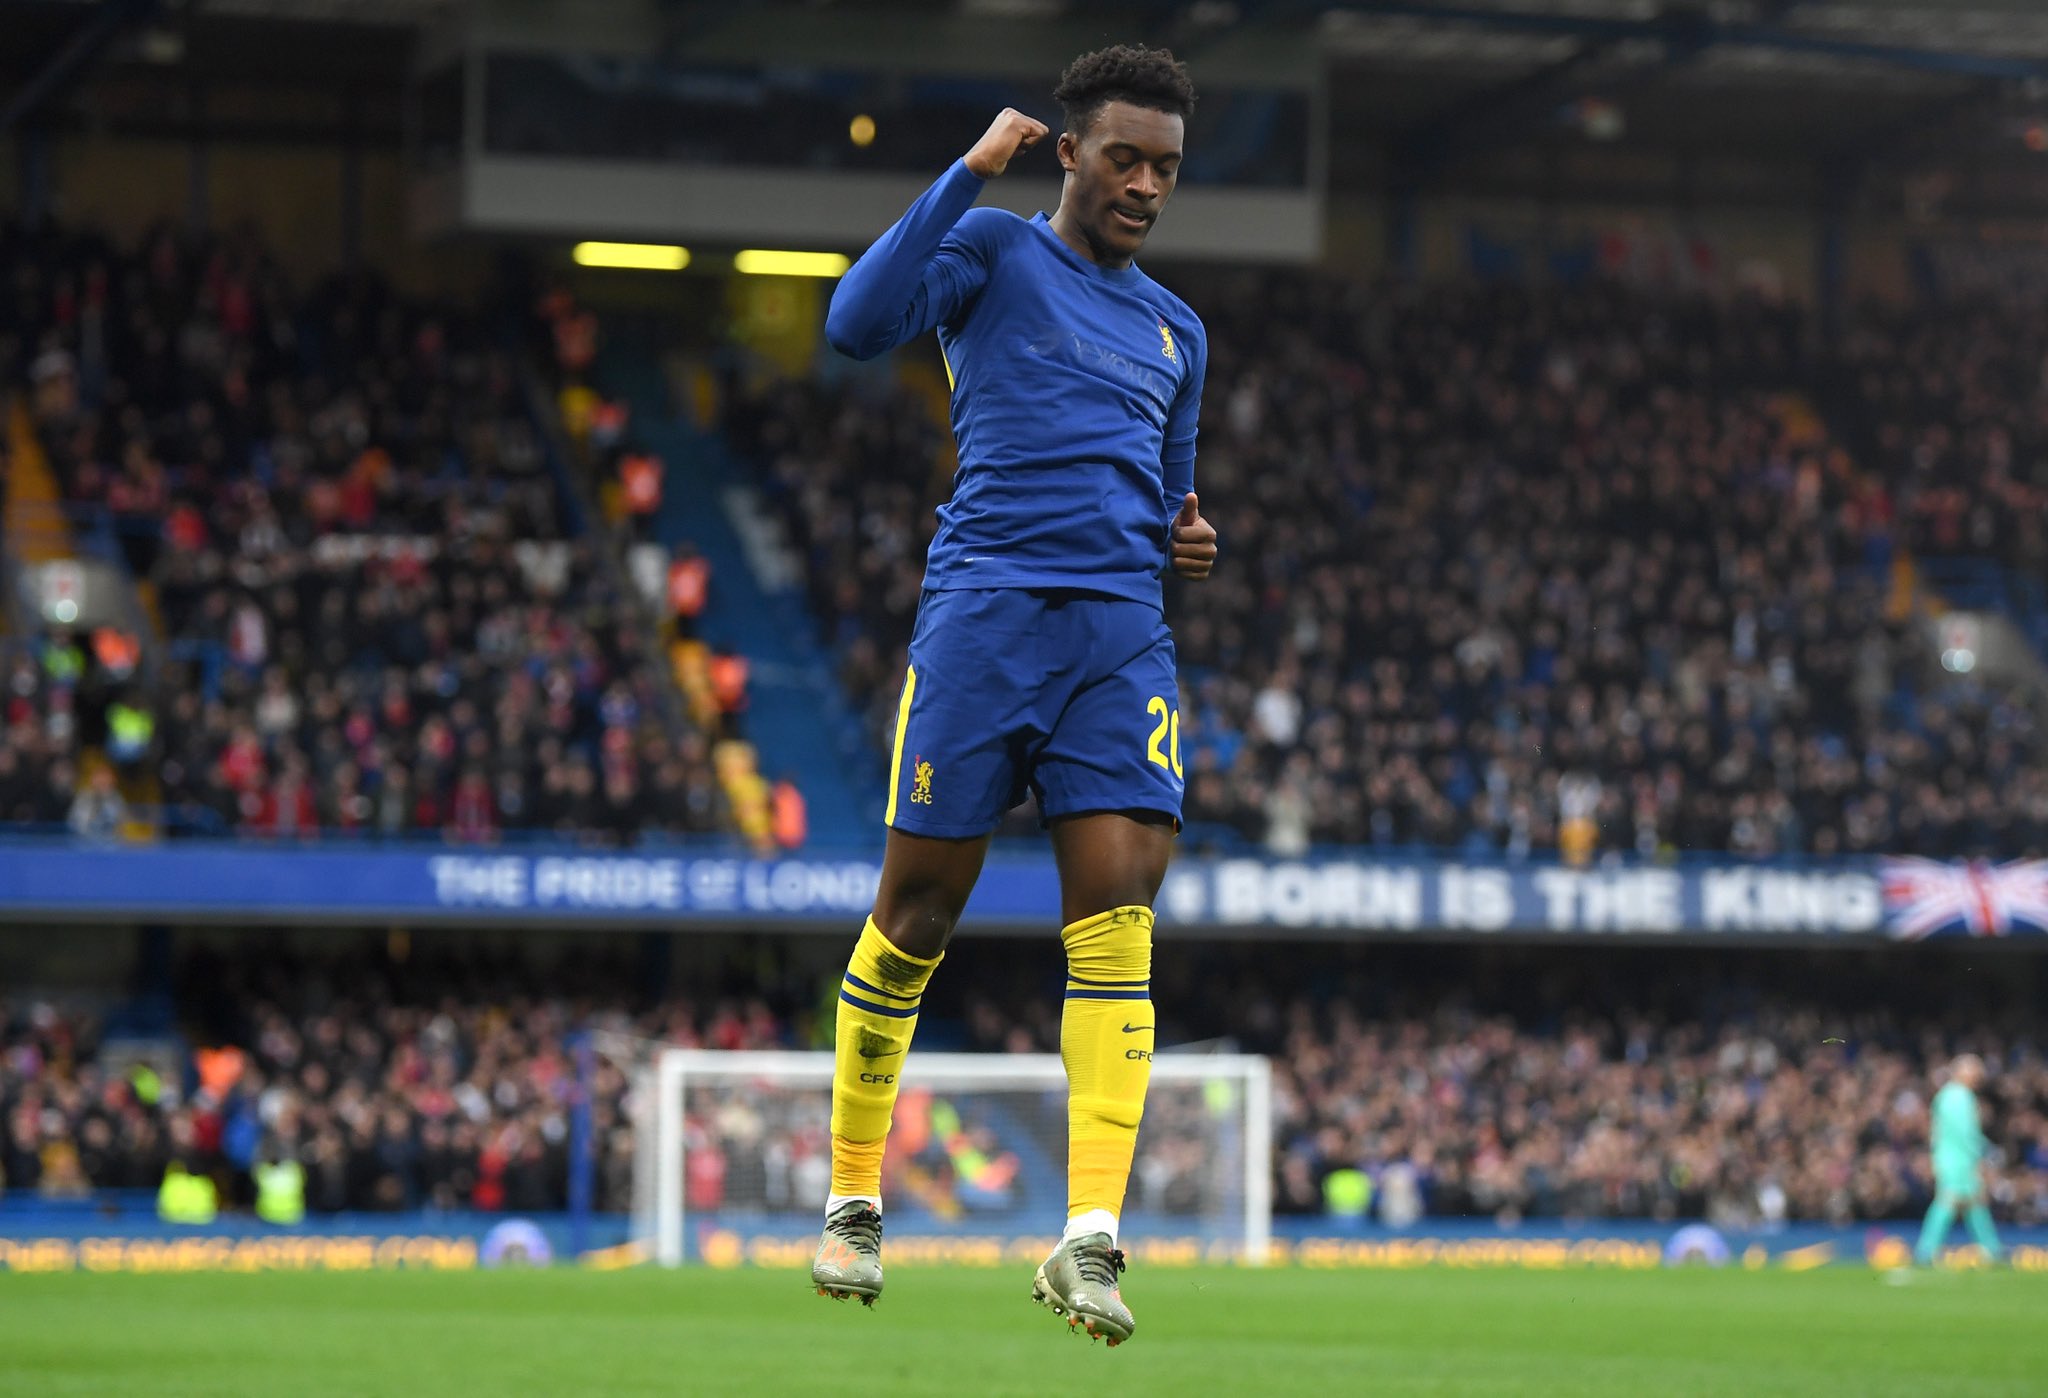 It's only a turning point if Callum Hudson Odoi makes it a turning point, asserts Thomas Tuchel